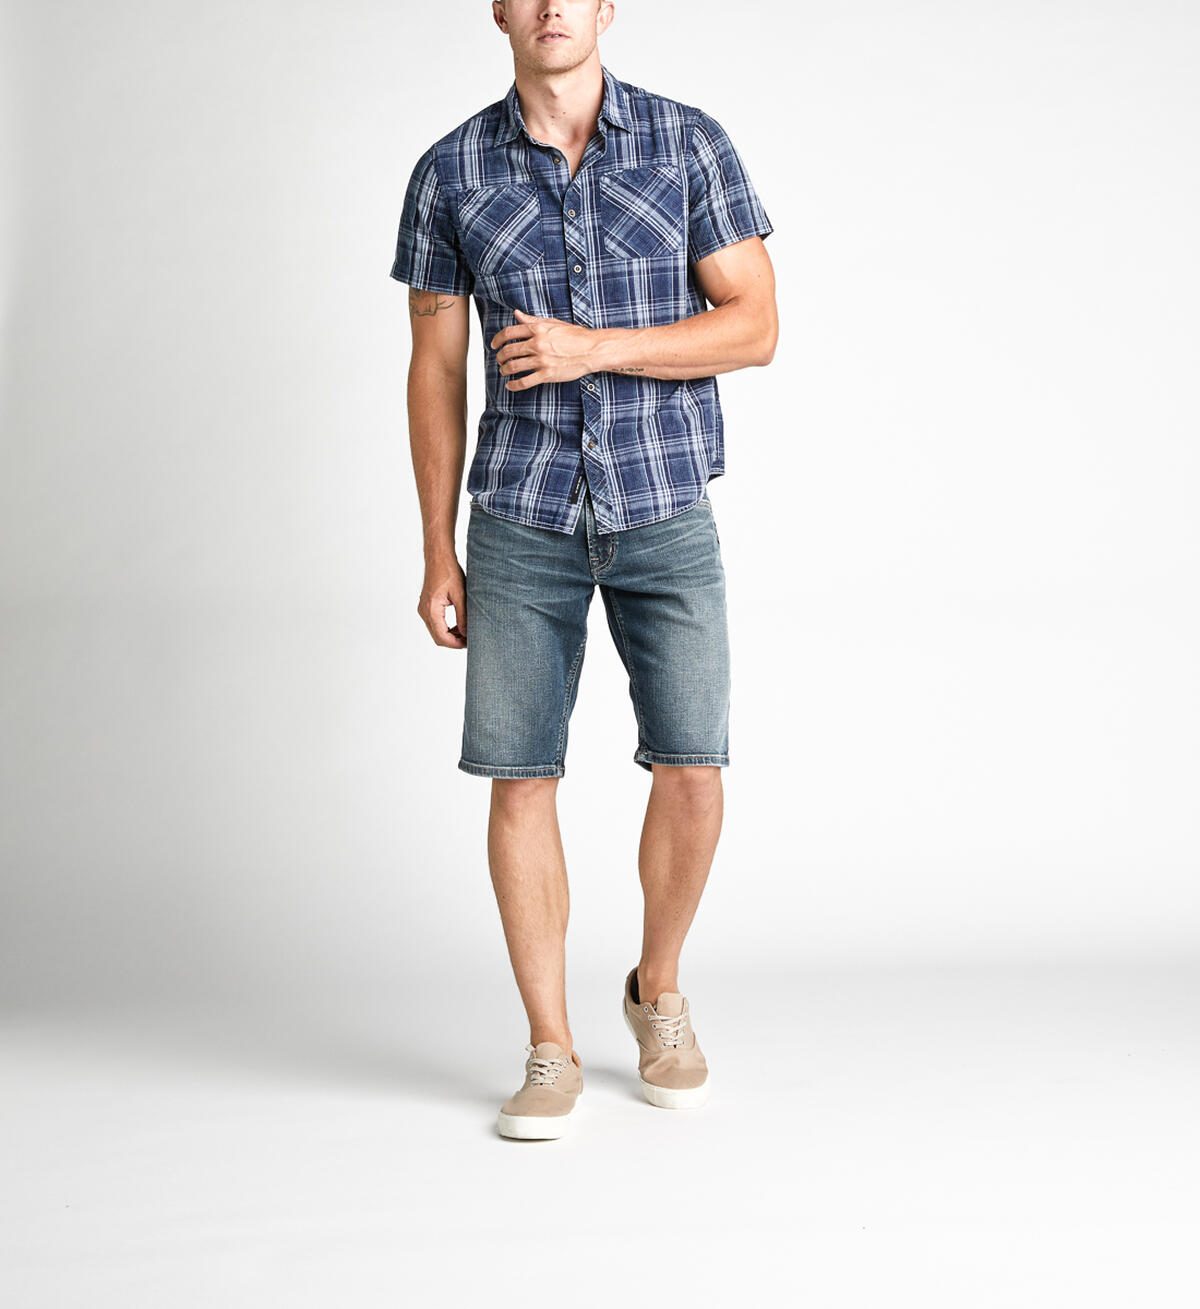 Colter Short-Sleeve Classic Shirt, , hi-res image number 1